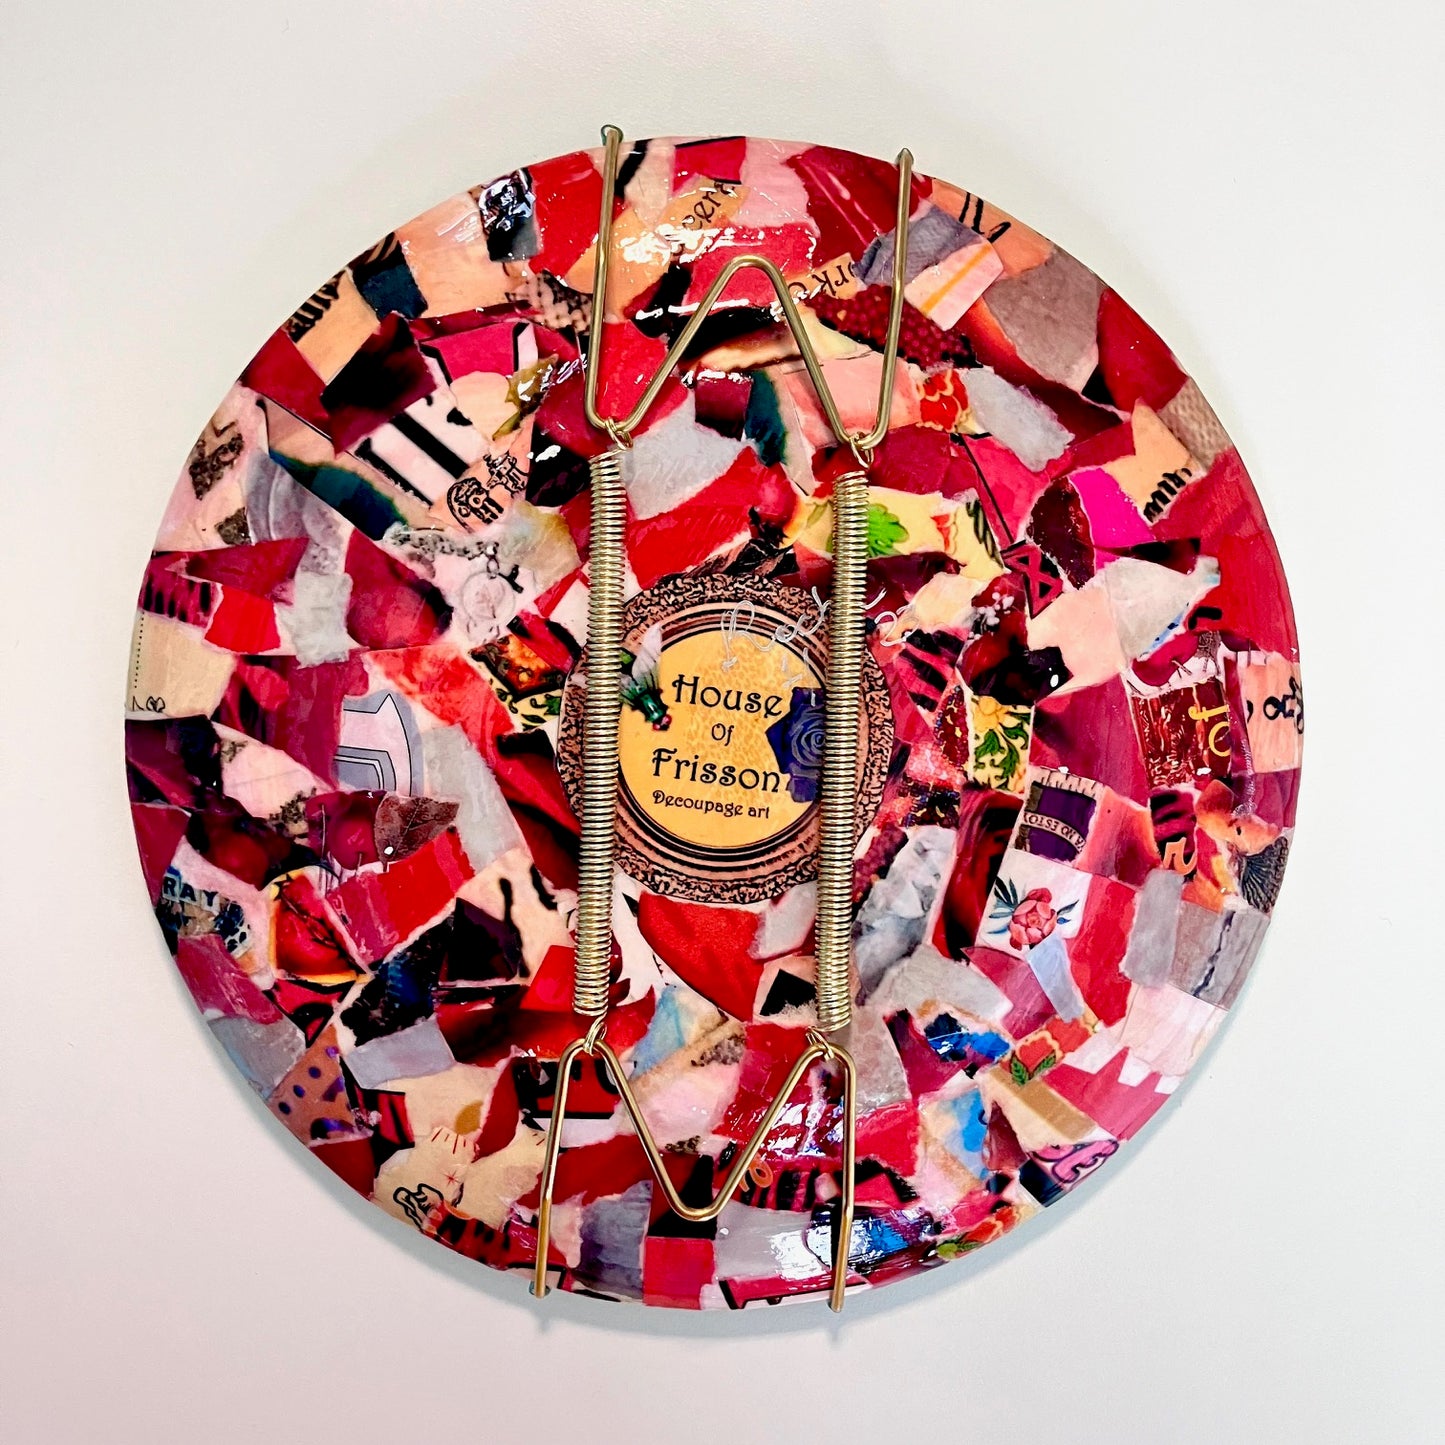 Green Upcycled Wall Plate - "Tosser" - by House of Frisson